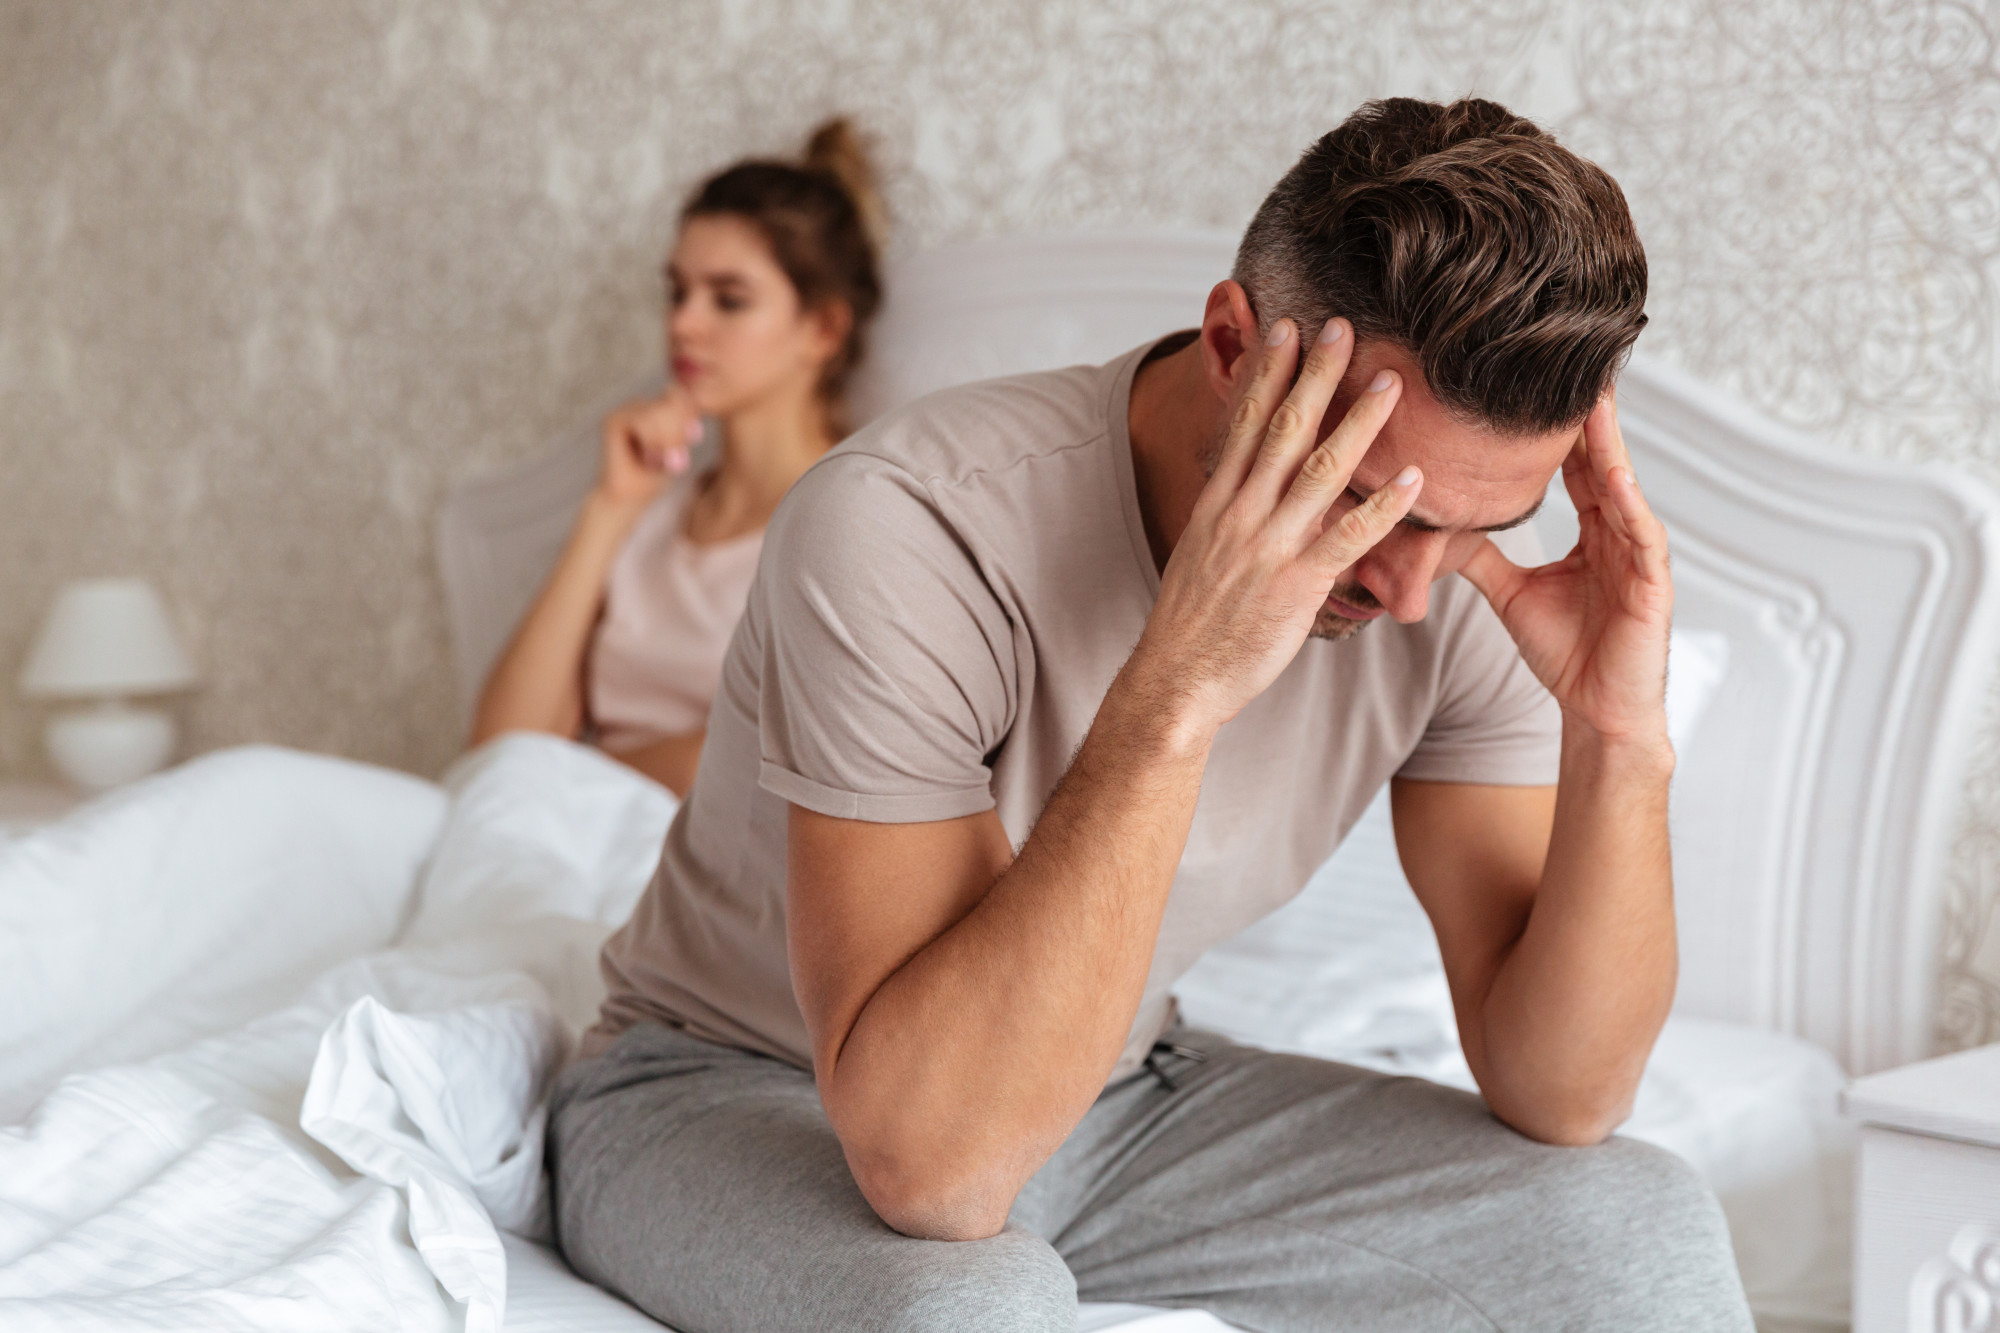 How Erectile Dysfunction can cause problems in a relationship